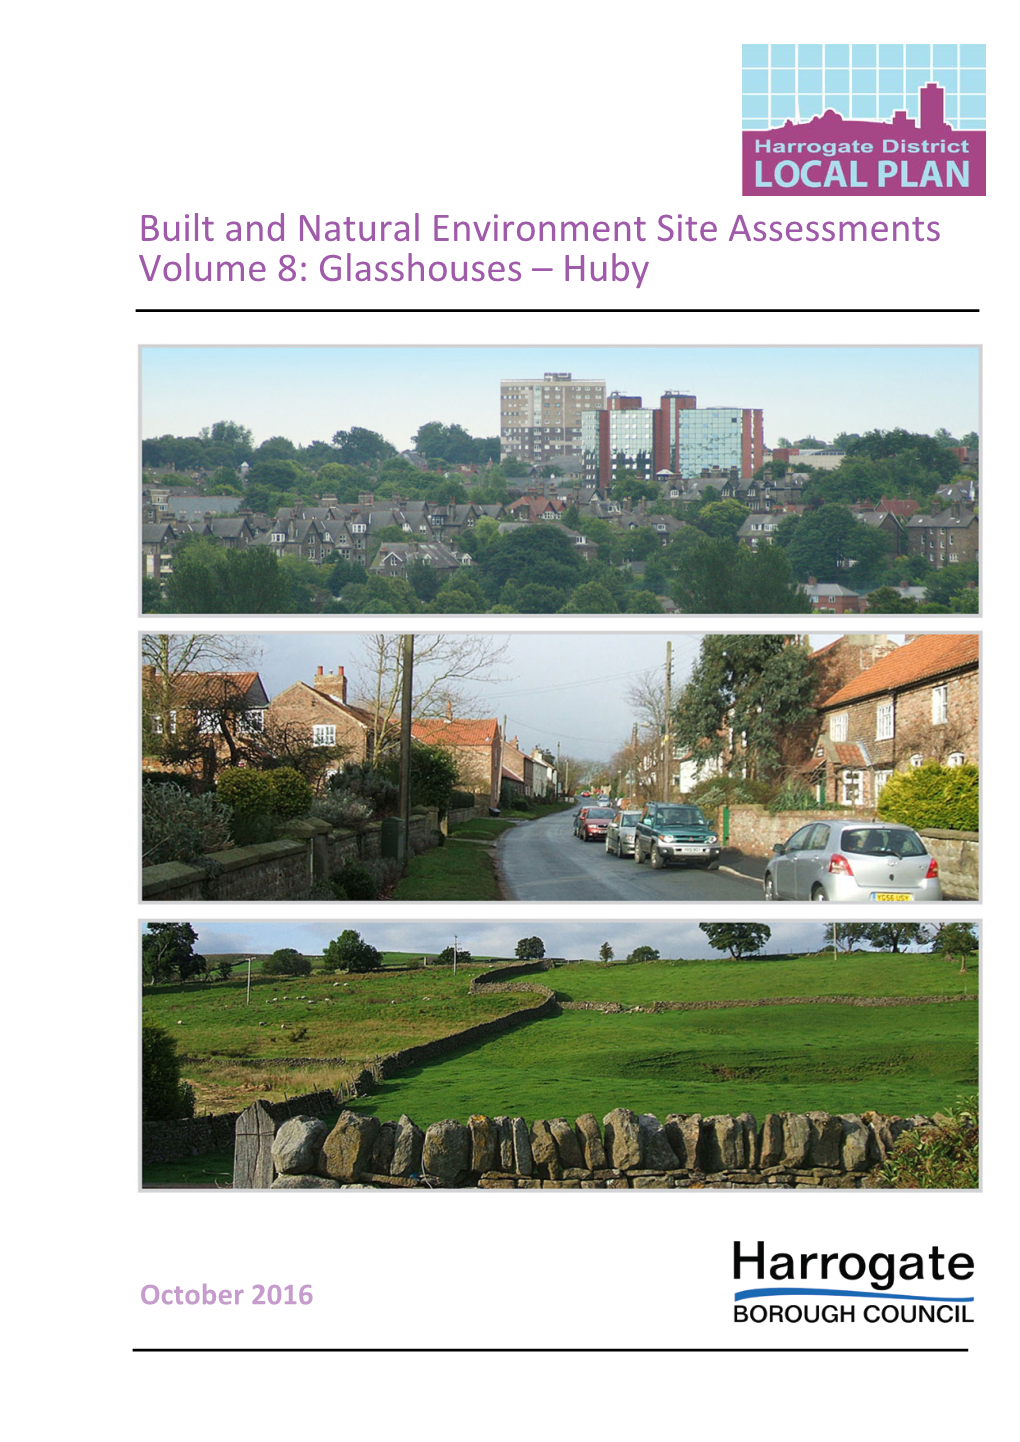 Built and Natural Environment Site Assessments Volume 8: Glasshouses – Huby